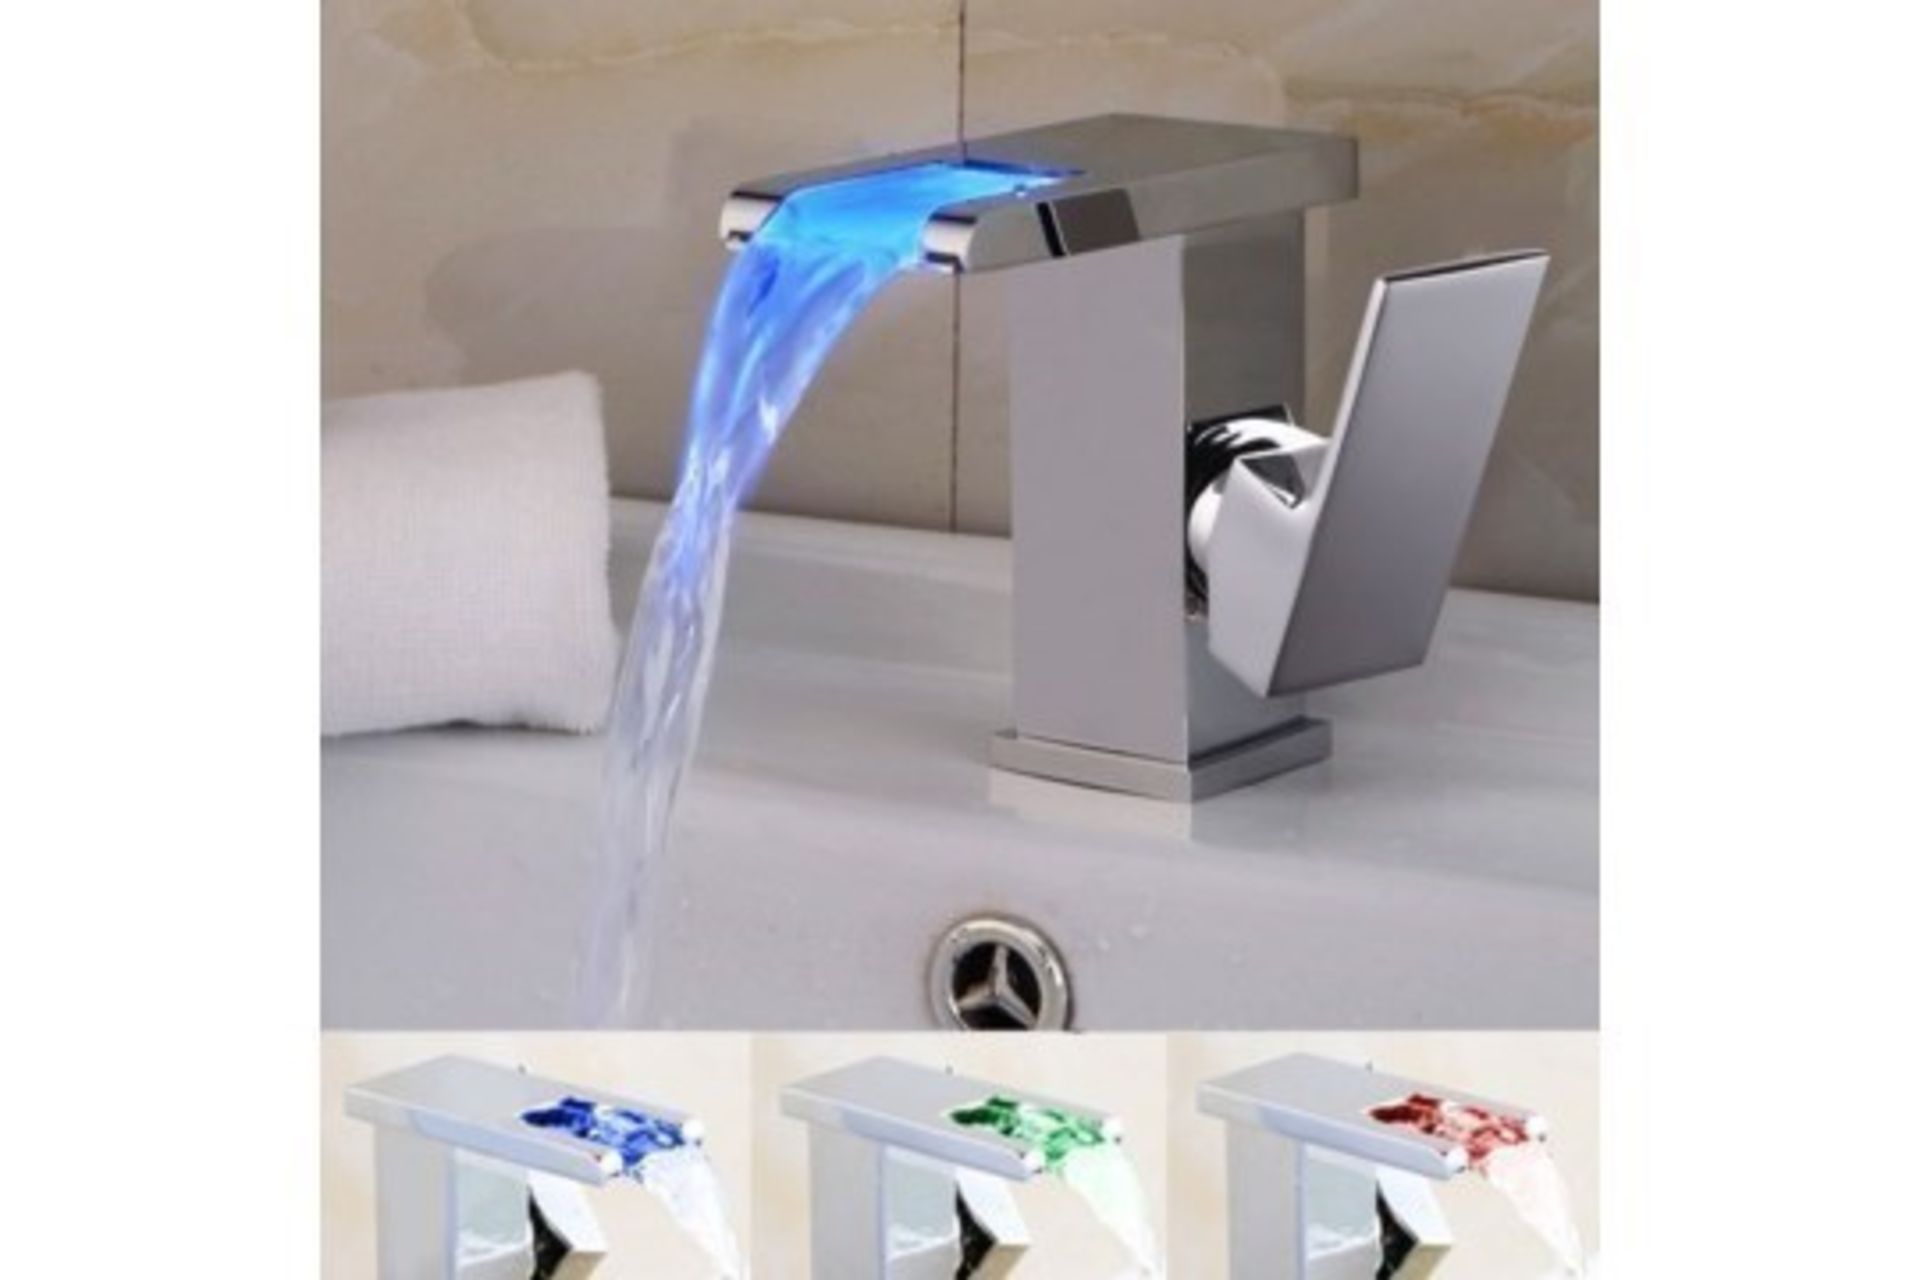 (QT1020) LED Waterfall Bathroom Basin Mixer Tap. RRP £229.99.Easy to install and clean. All ... - Image 2 of 4